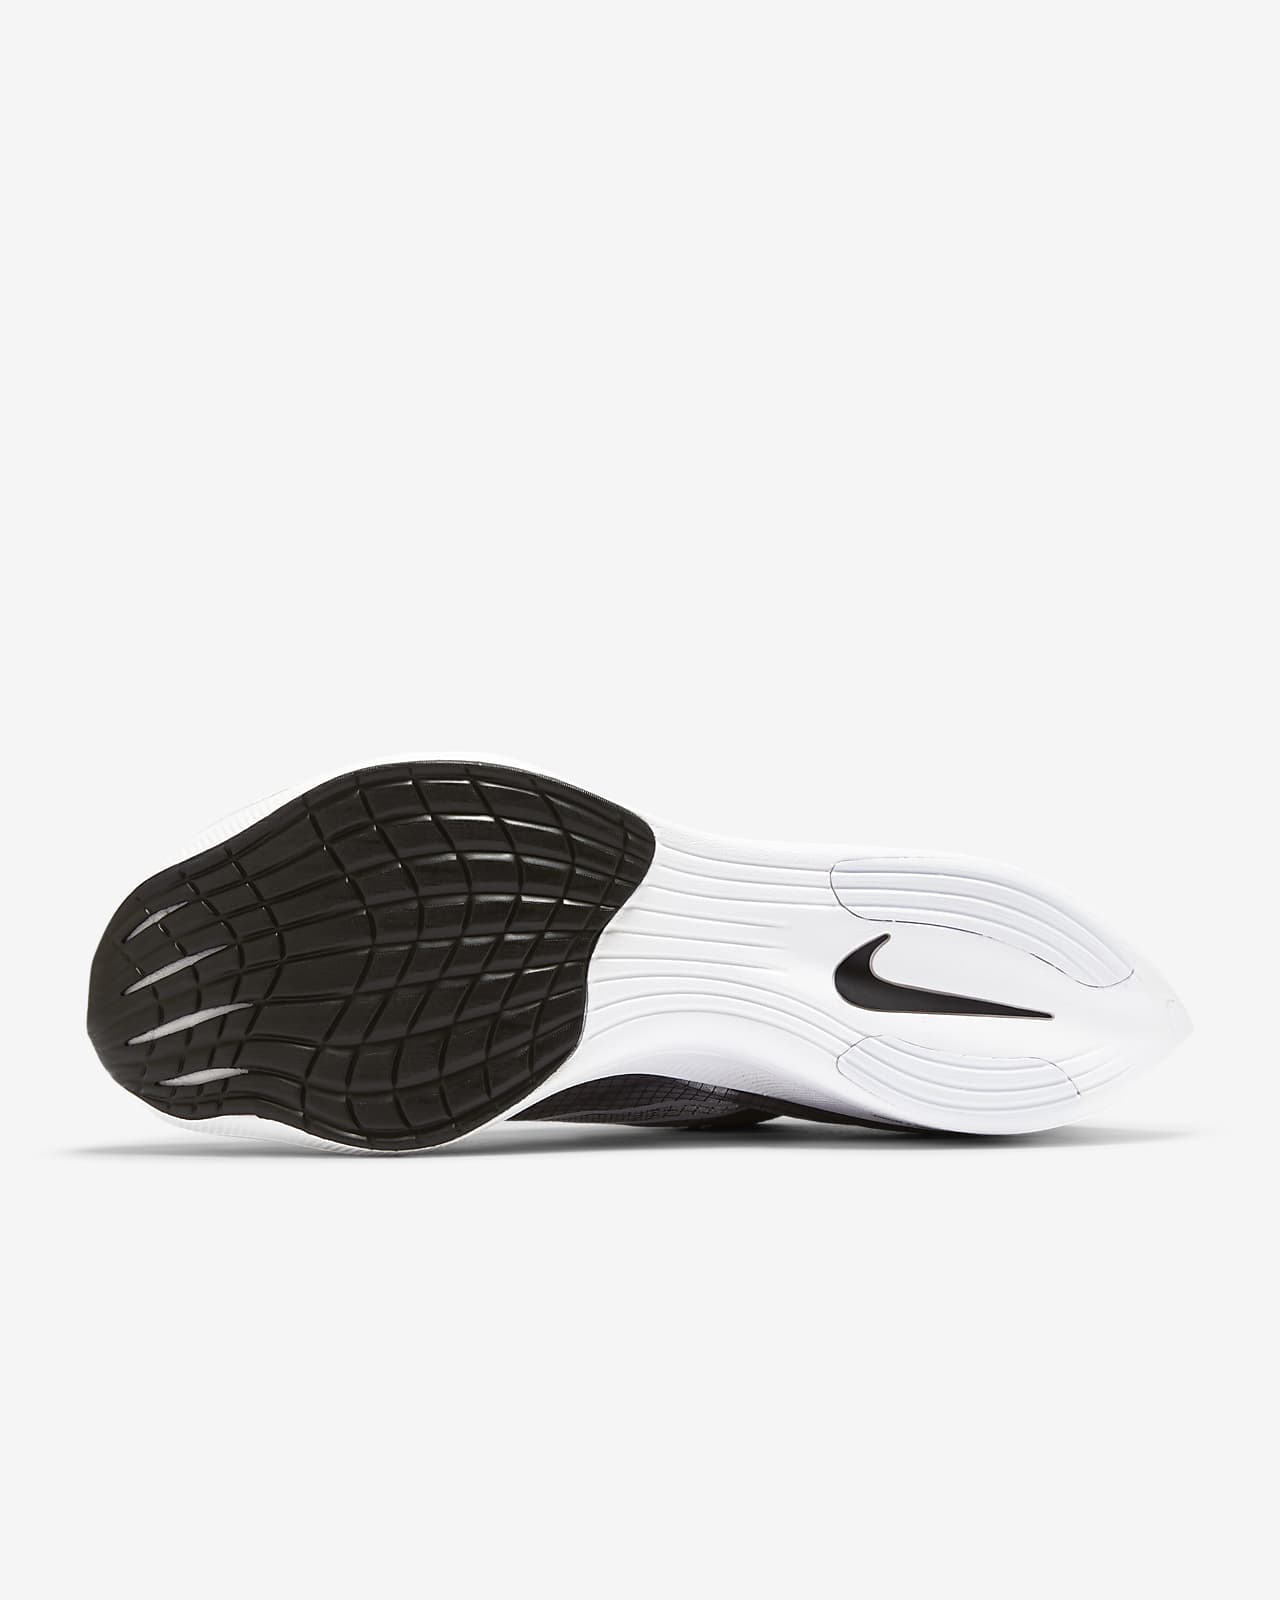 nike vaporfly next sold out